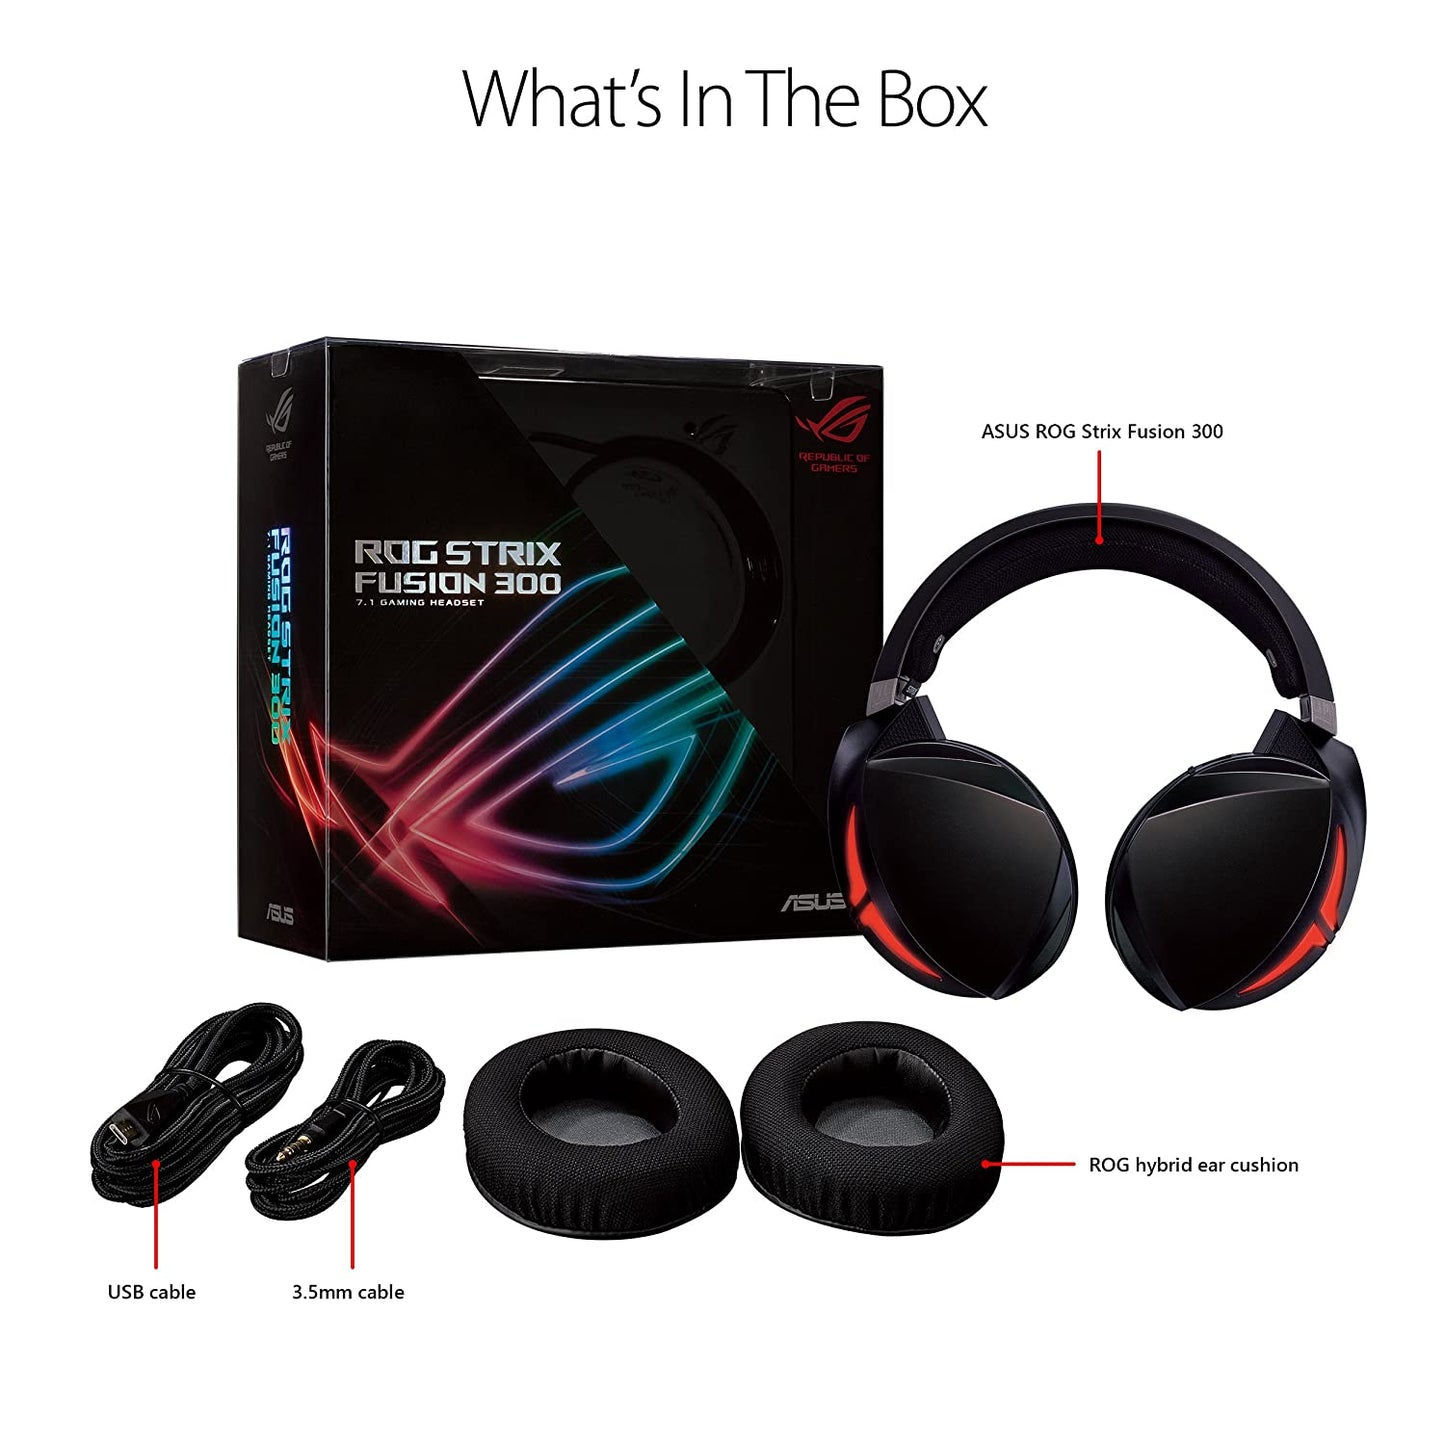 Asus ROG Strix Fusion 300 7.1 gaming headset delivers immersive gaming audio and is compatible with PC, PS4, Xbox One and mobile devices